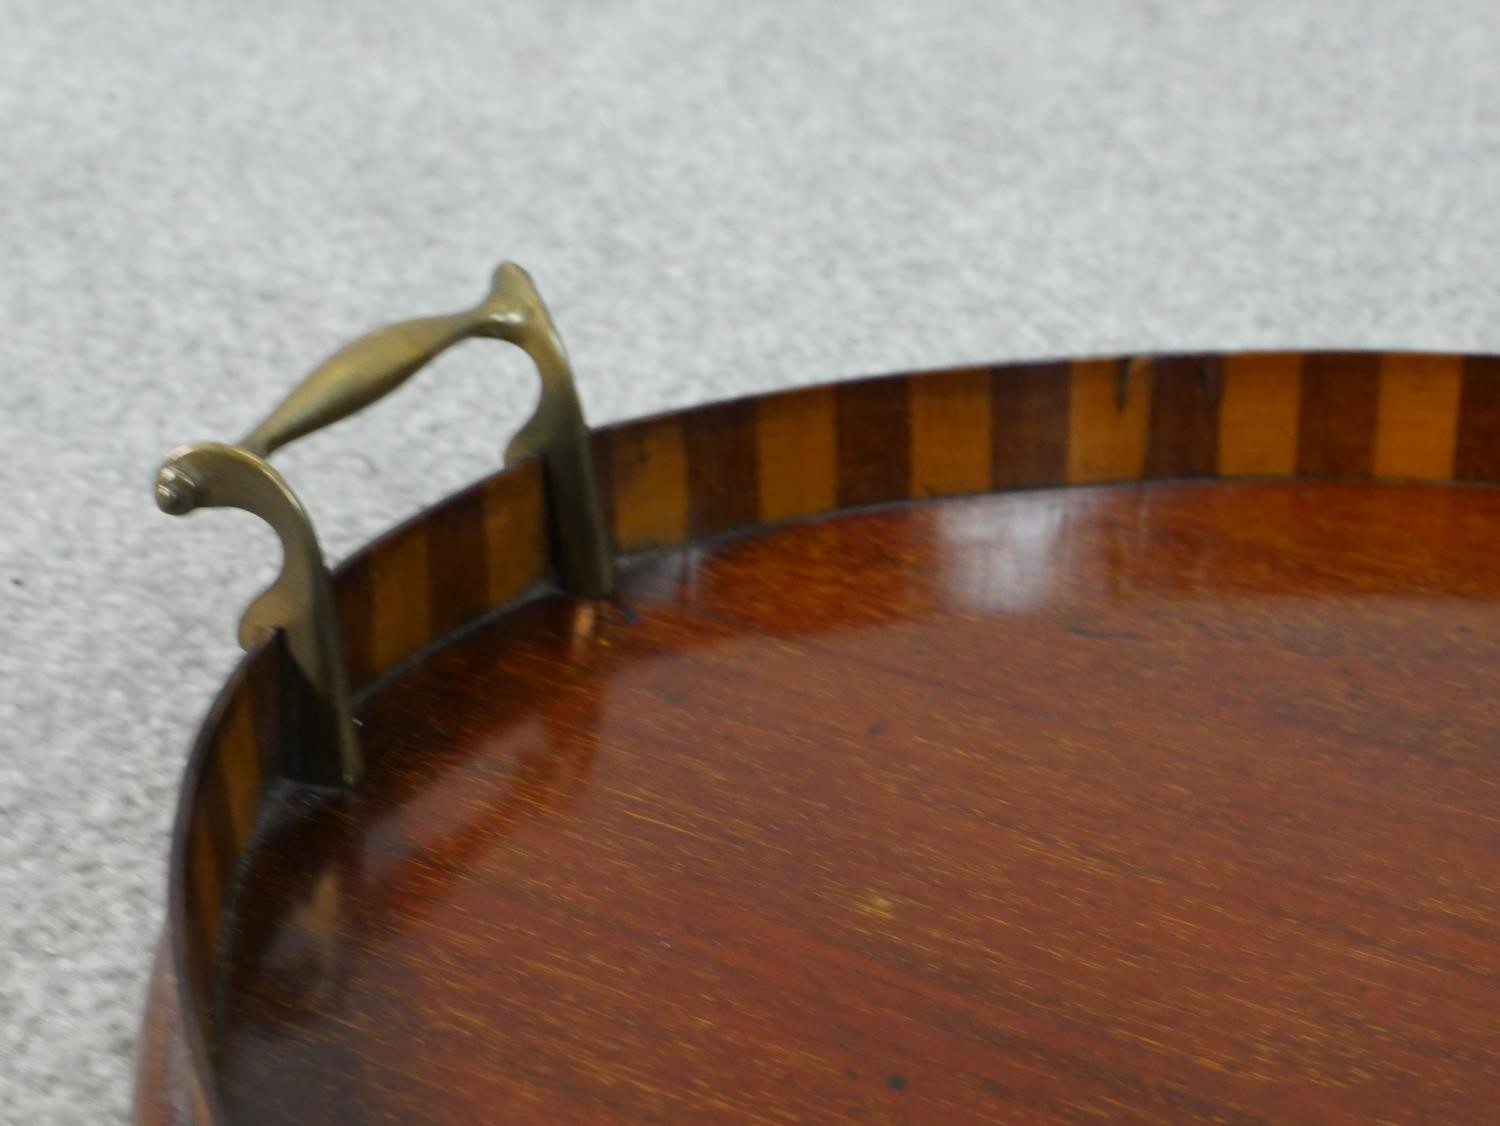 An Edwardian walnut and marquetry inlaid oval tray, with two brass handles, the centre inlaid with a - Image 3 of 4